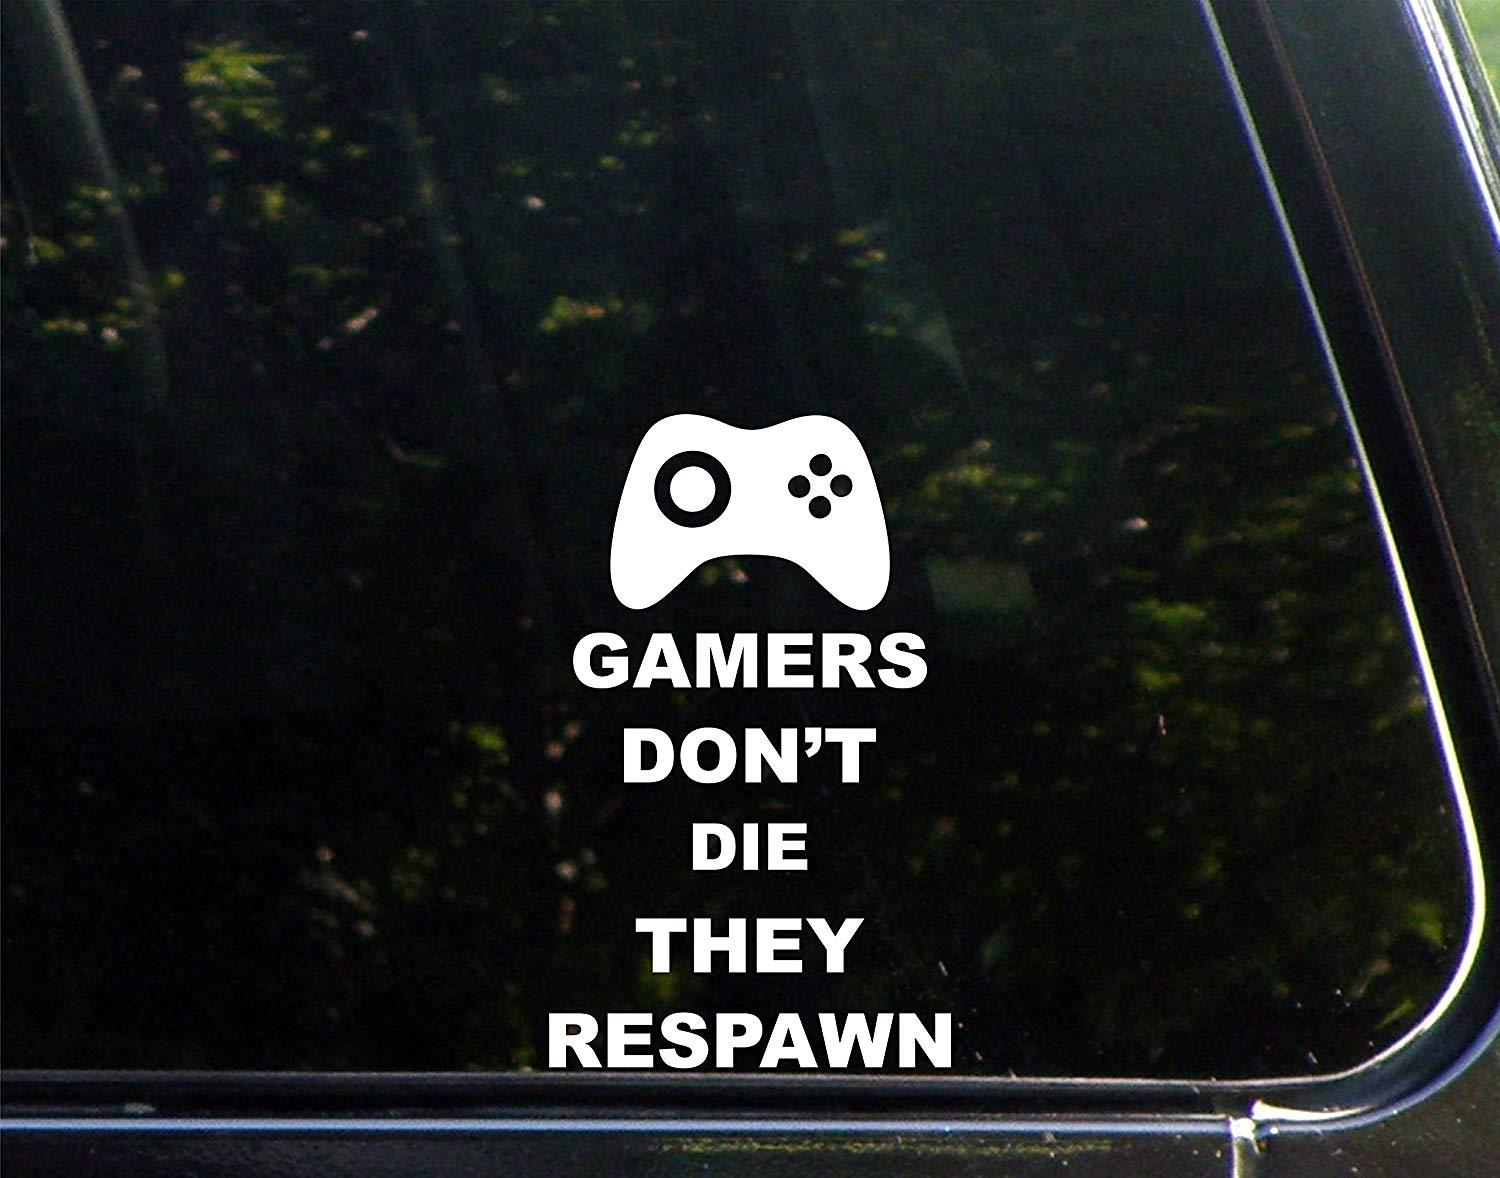 gamers don't die they respawn wallpapers wallpaper cave on gamers dont die they respawn wallpapers